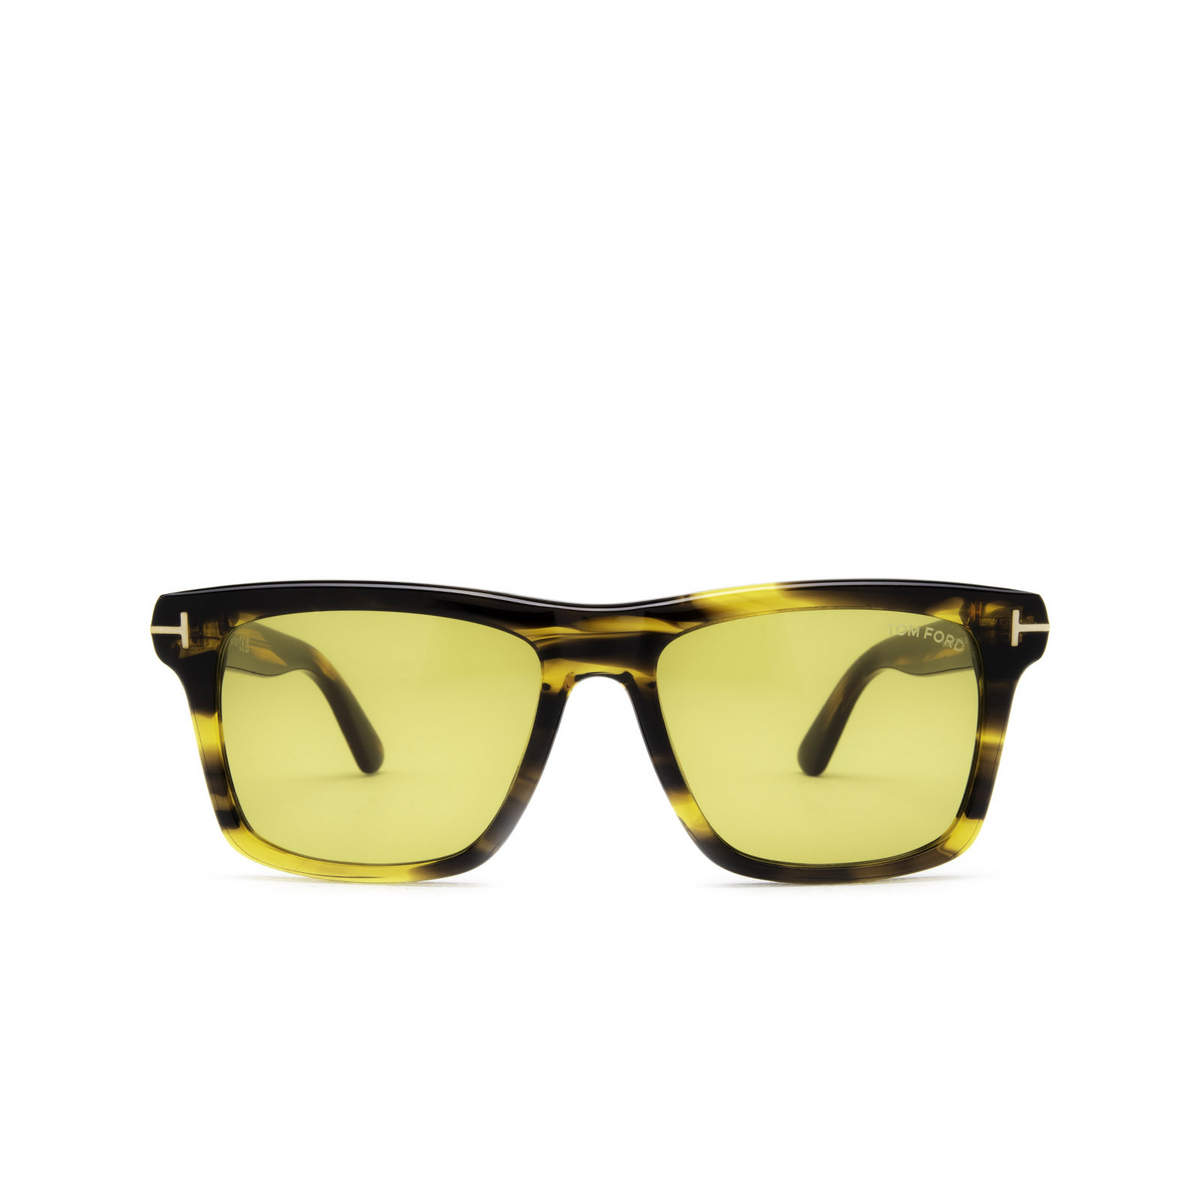 Tom Ford BUCKLEY-02 Sunglasses 55E Havana - front view